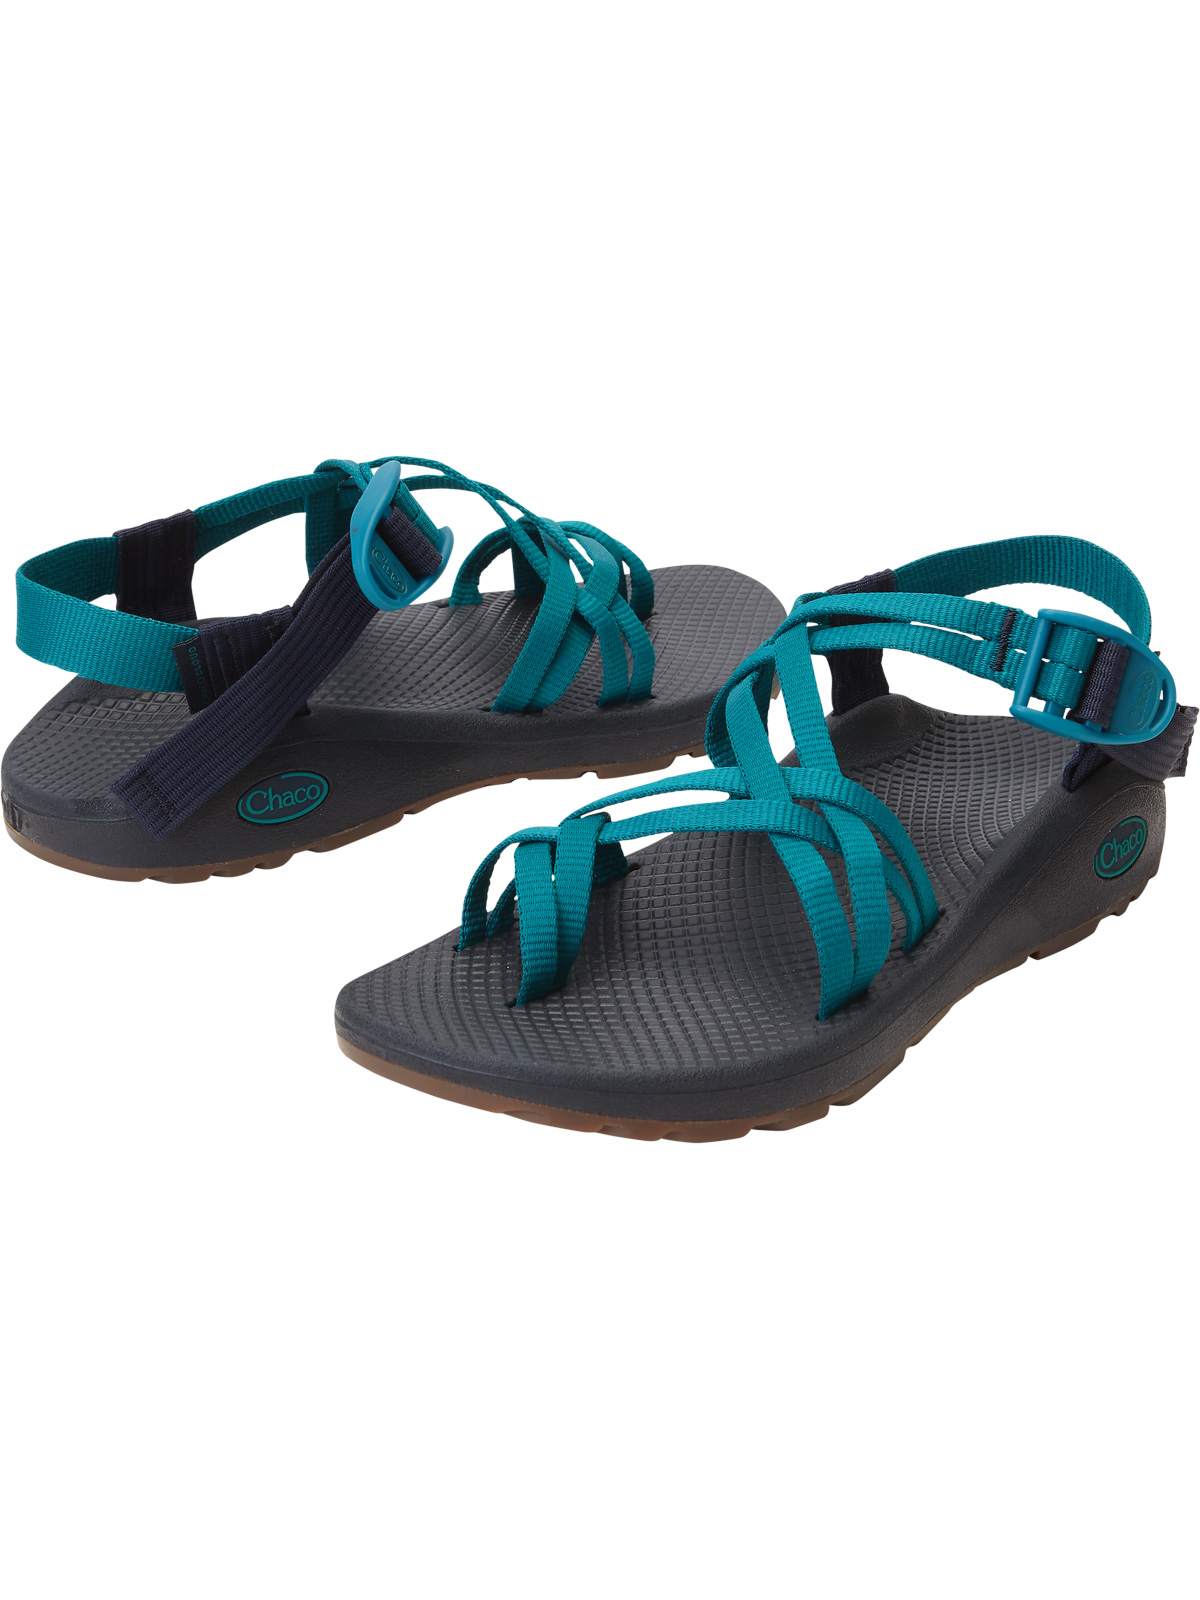 girls chaco sandals